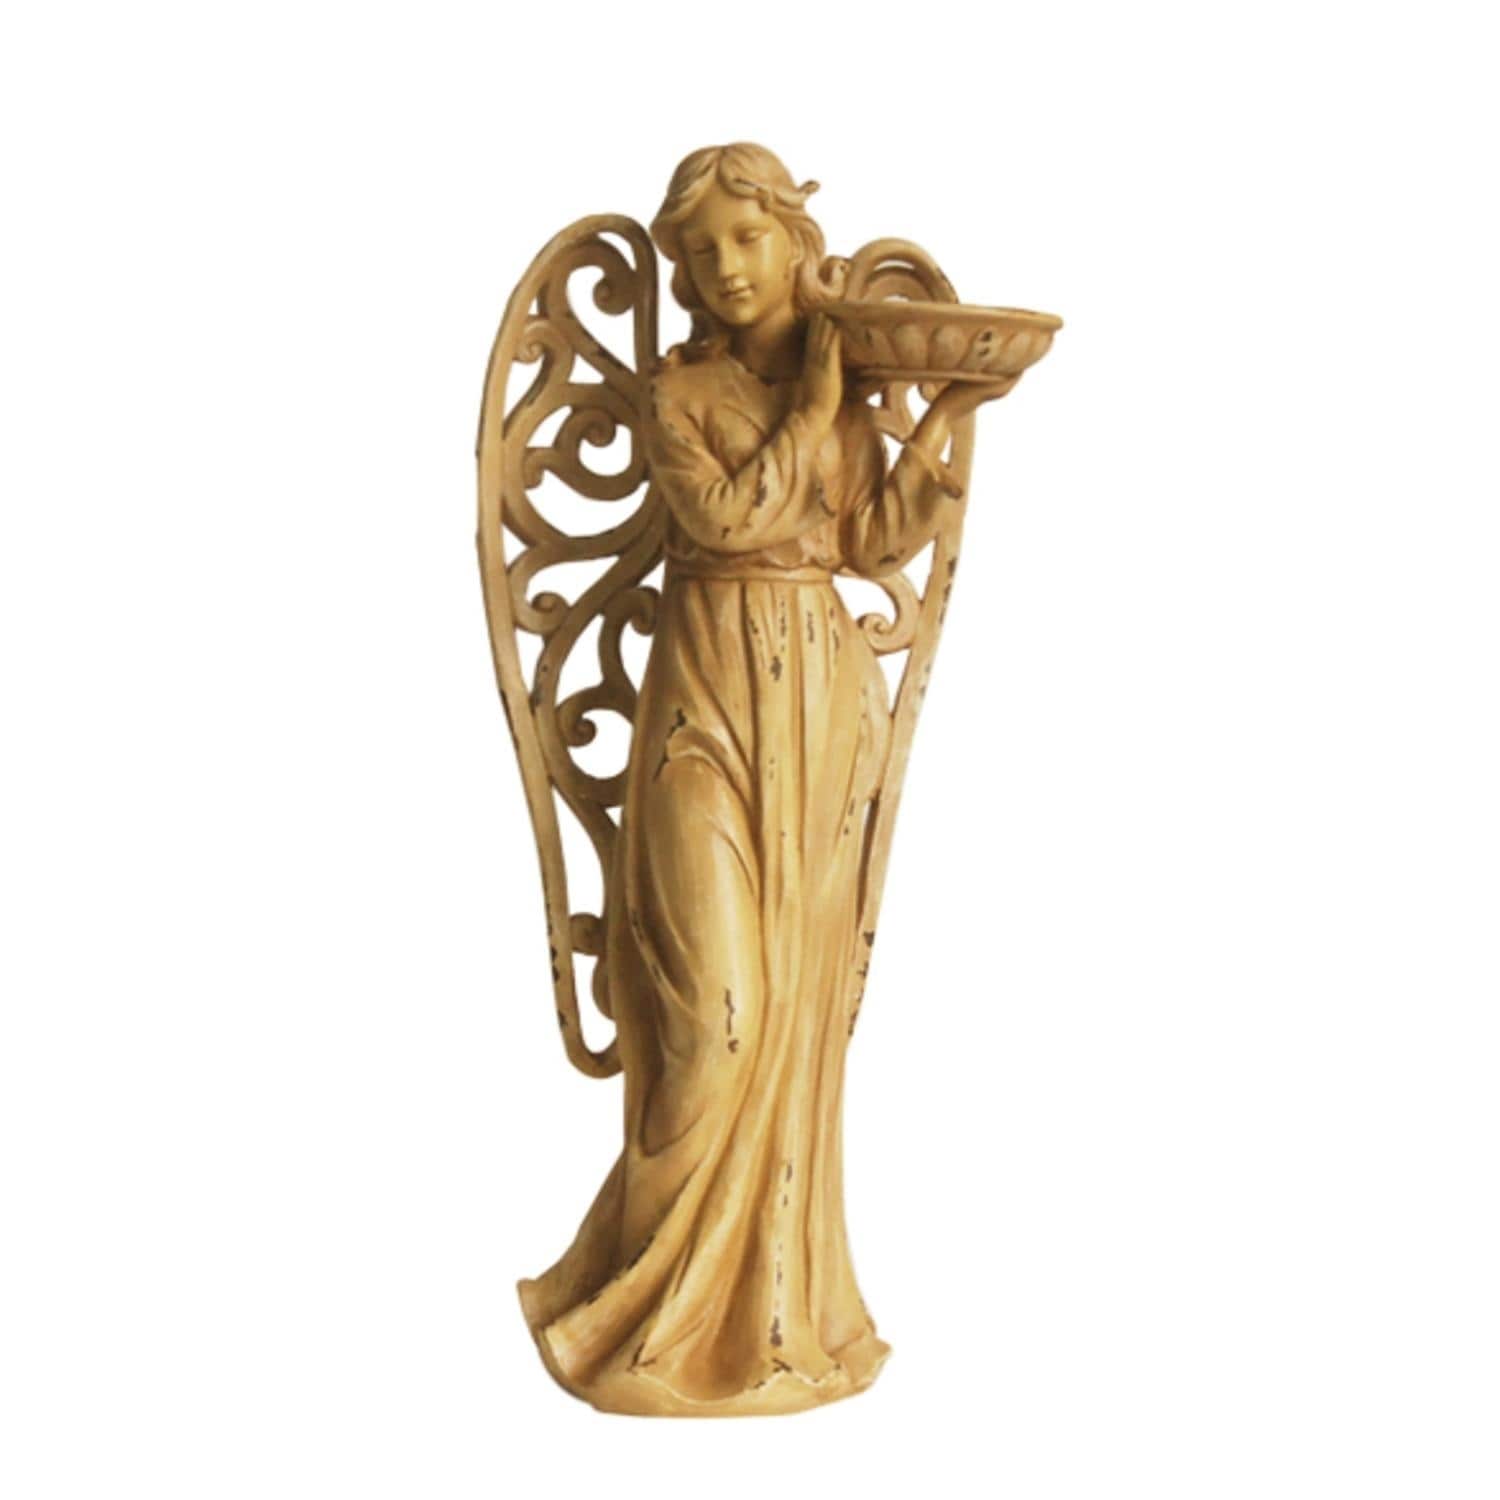 Northlight Tranquil Angel with Scrollwork Wings Outdoor Birdbath - image 2 of 2